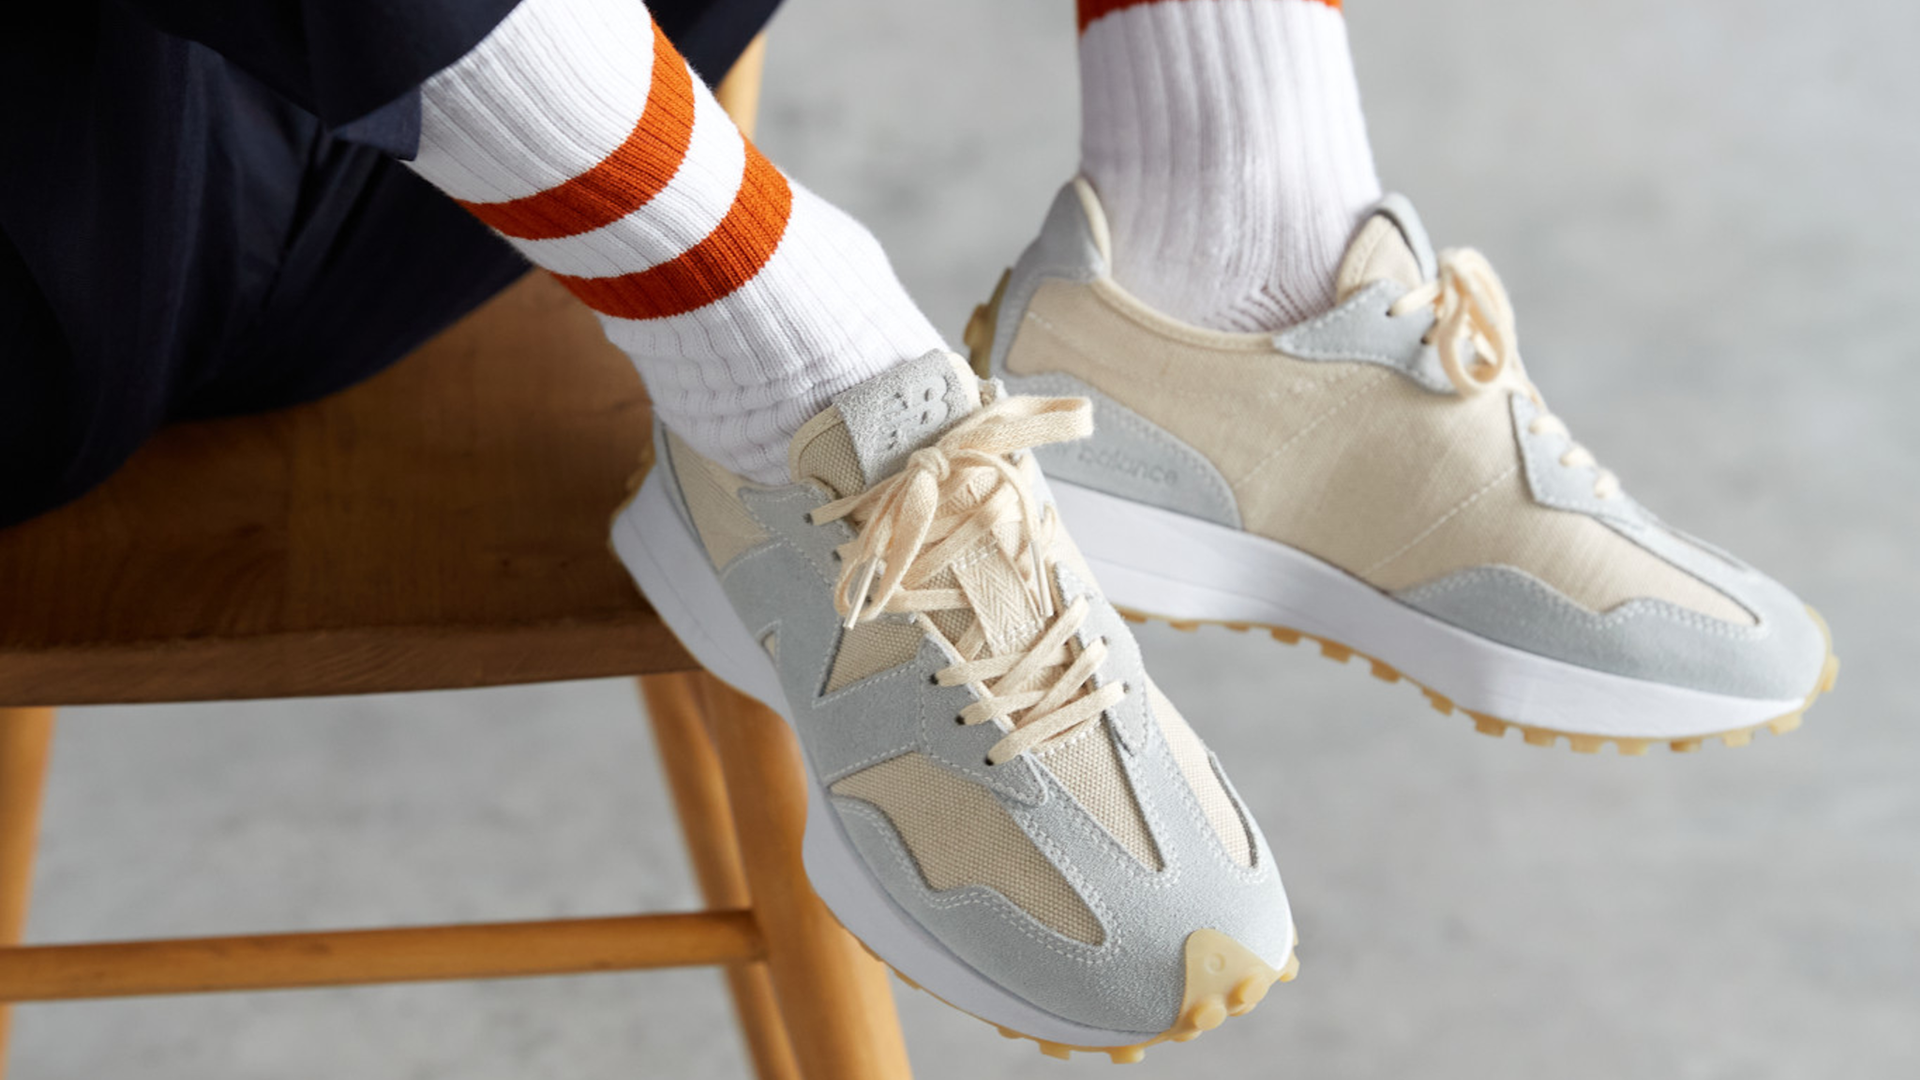 New Balance Press Box : New Balance Releases the New 327 Undyed ...